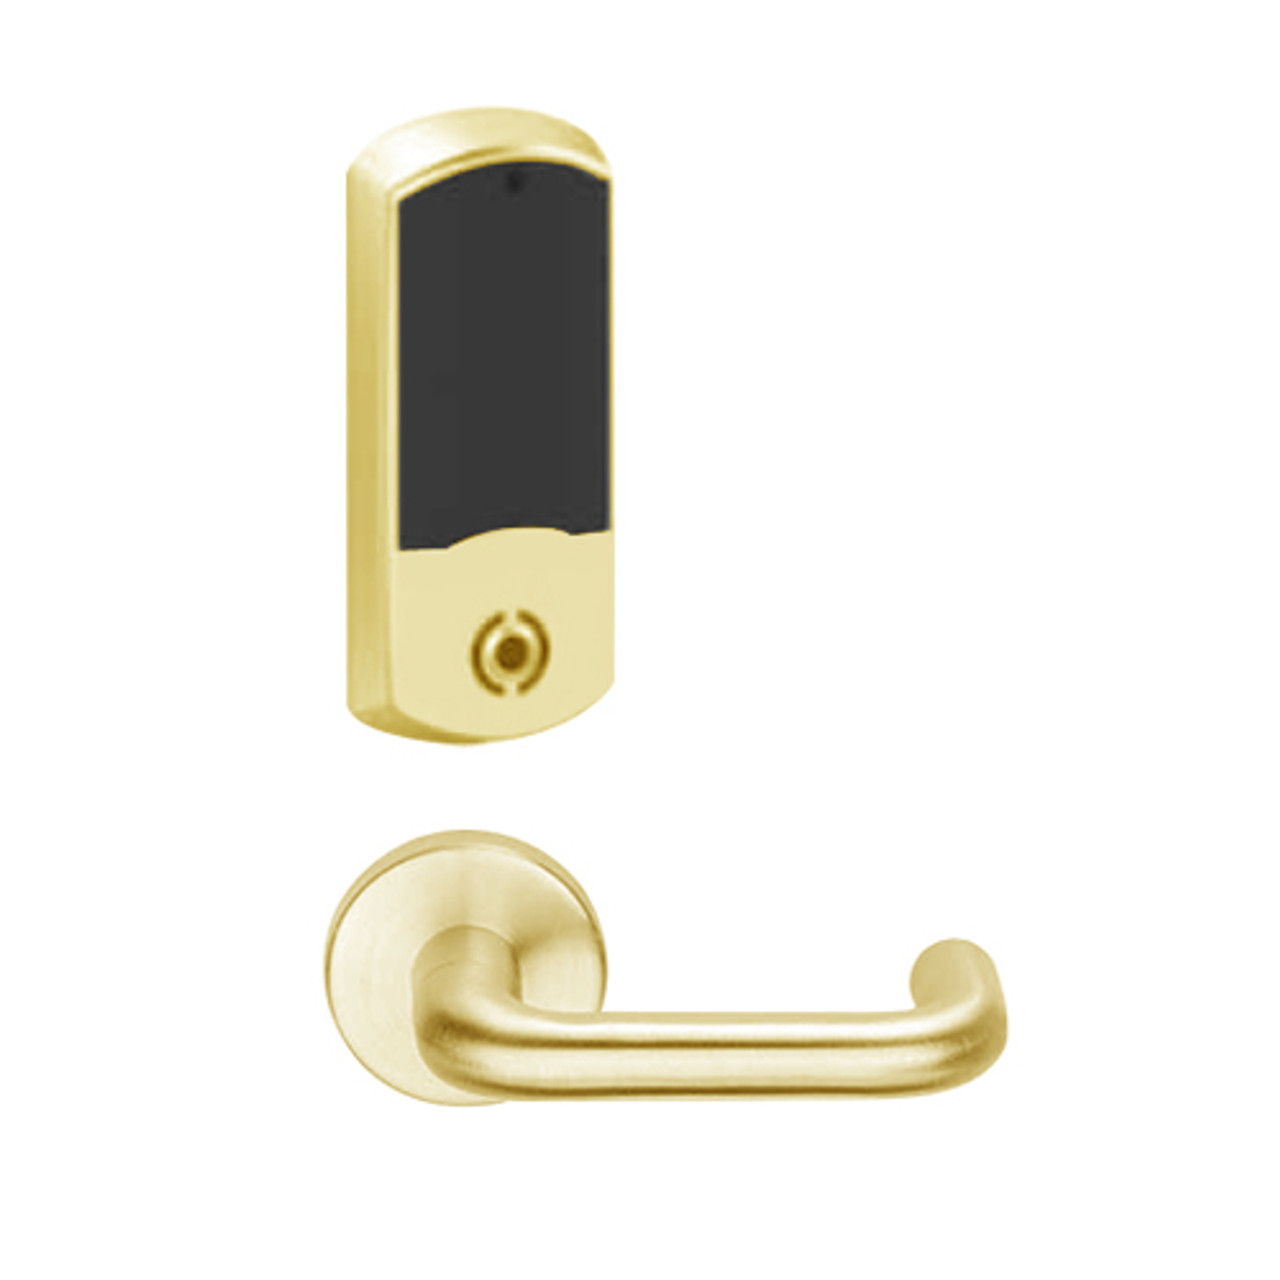 LEMS-GRW-BD-03-605-00C Schlage Storeroom Wireless Greenwich Mortise Lock with LED Indicator and Tubular Lever Prepped for SFIC in Bright Brass